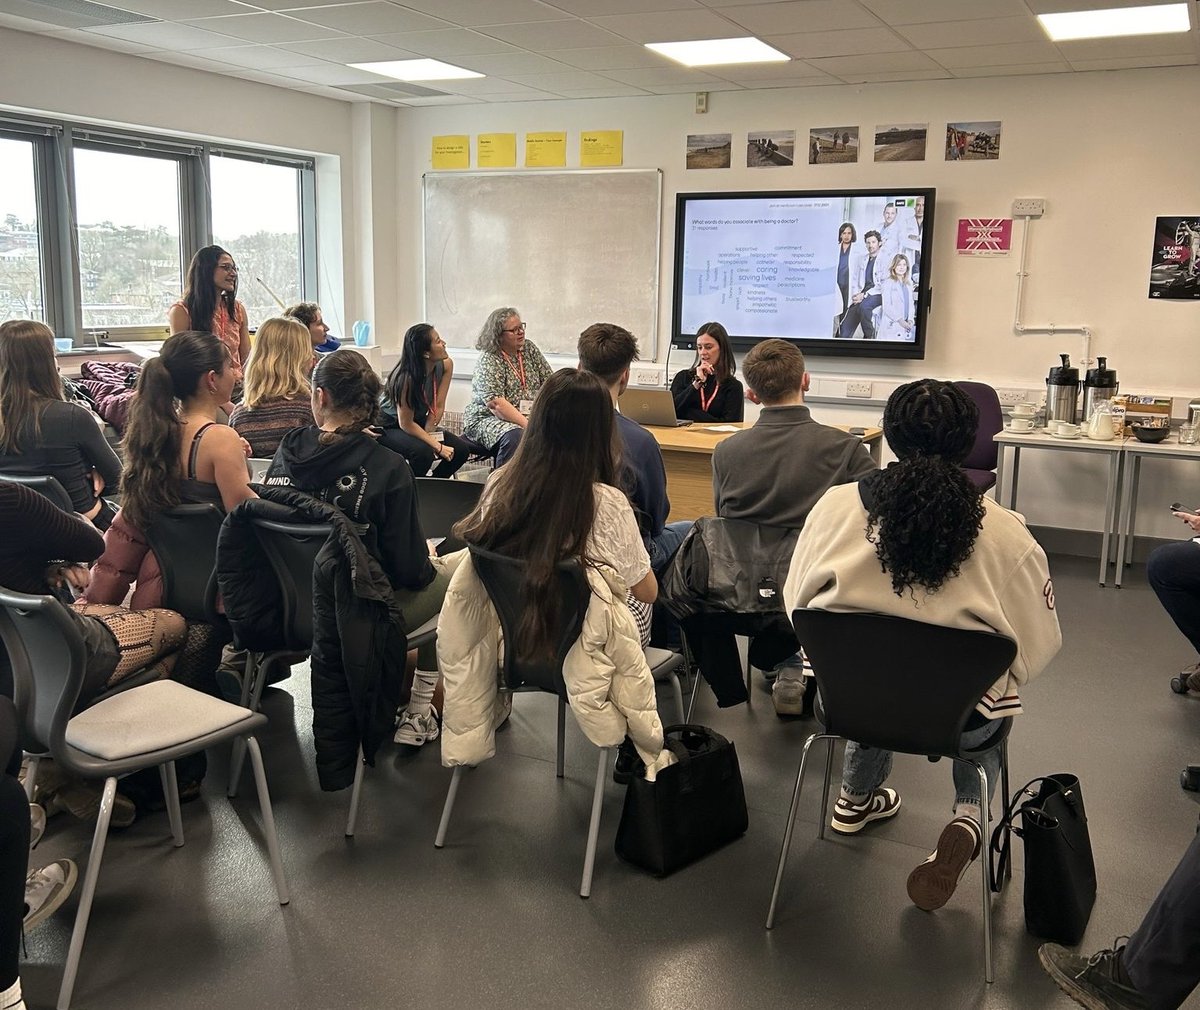 The ASPIRE programme at Haywards Heath College sponsored by Fairfax 'Building Young Futures' provides workshop experience for students interested in medical careers.